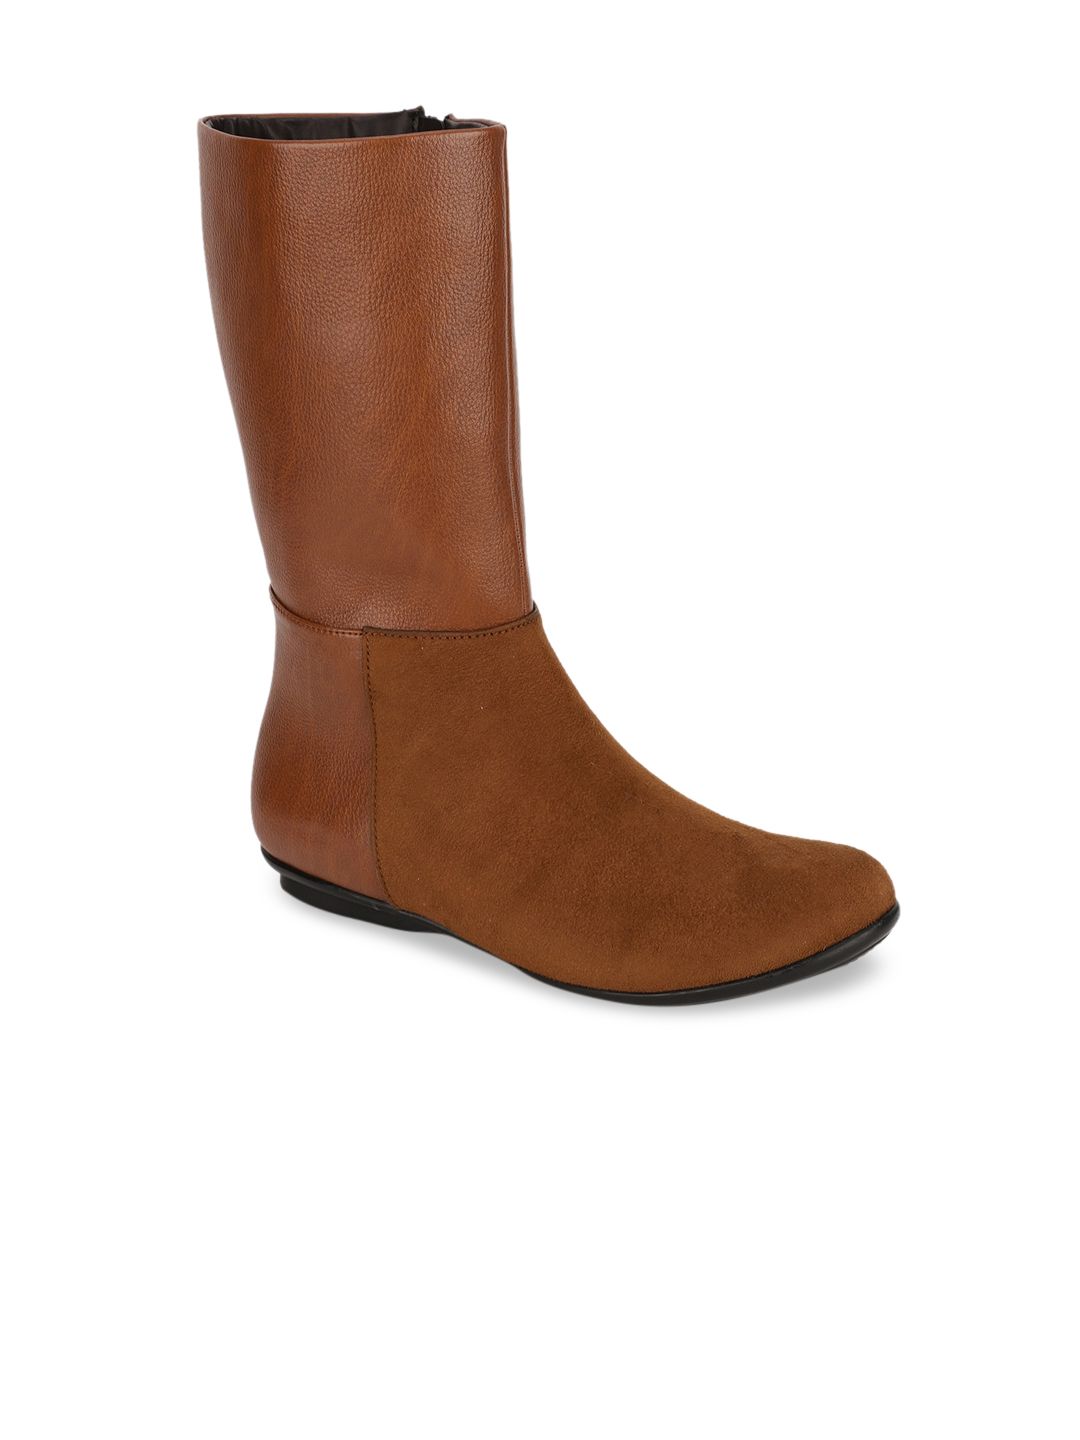 Bruno Manetti Tan Suede Comfort Heeled Mid-Top Boots Price in India